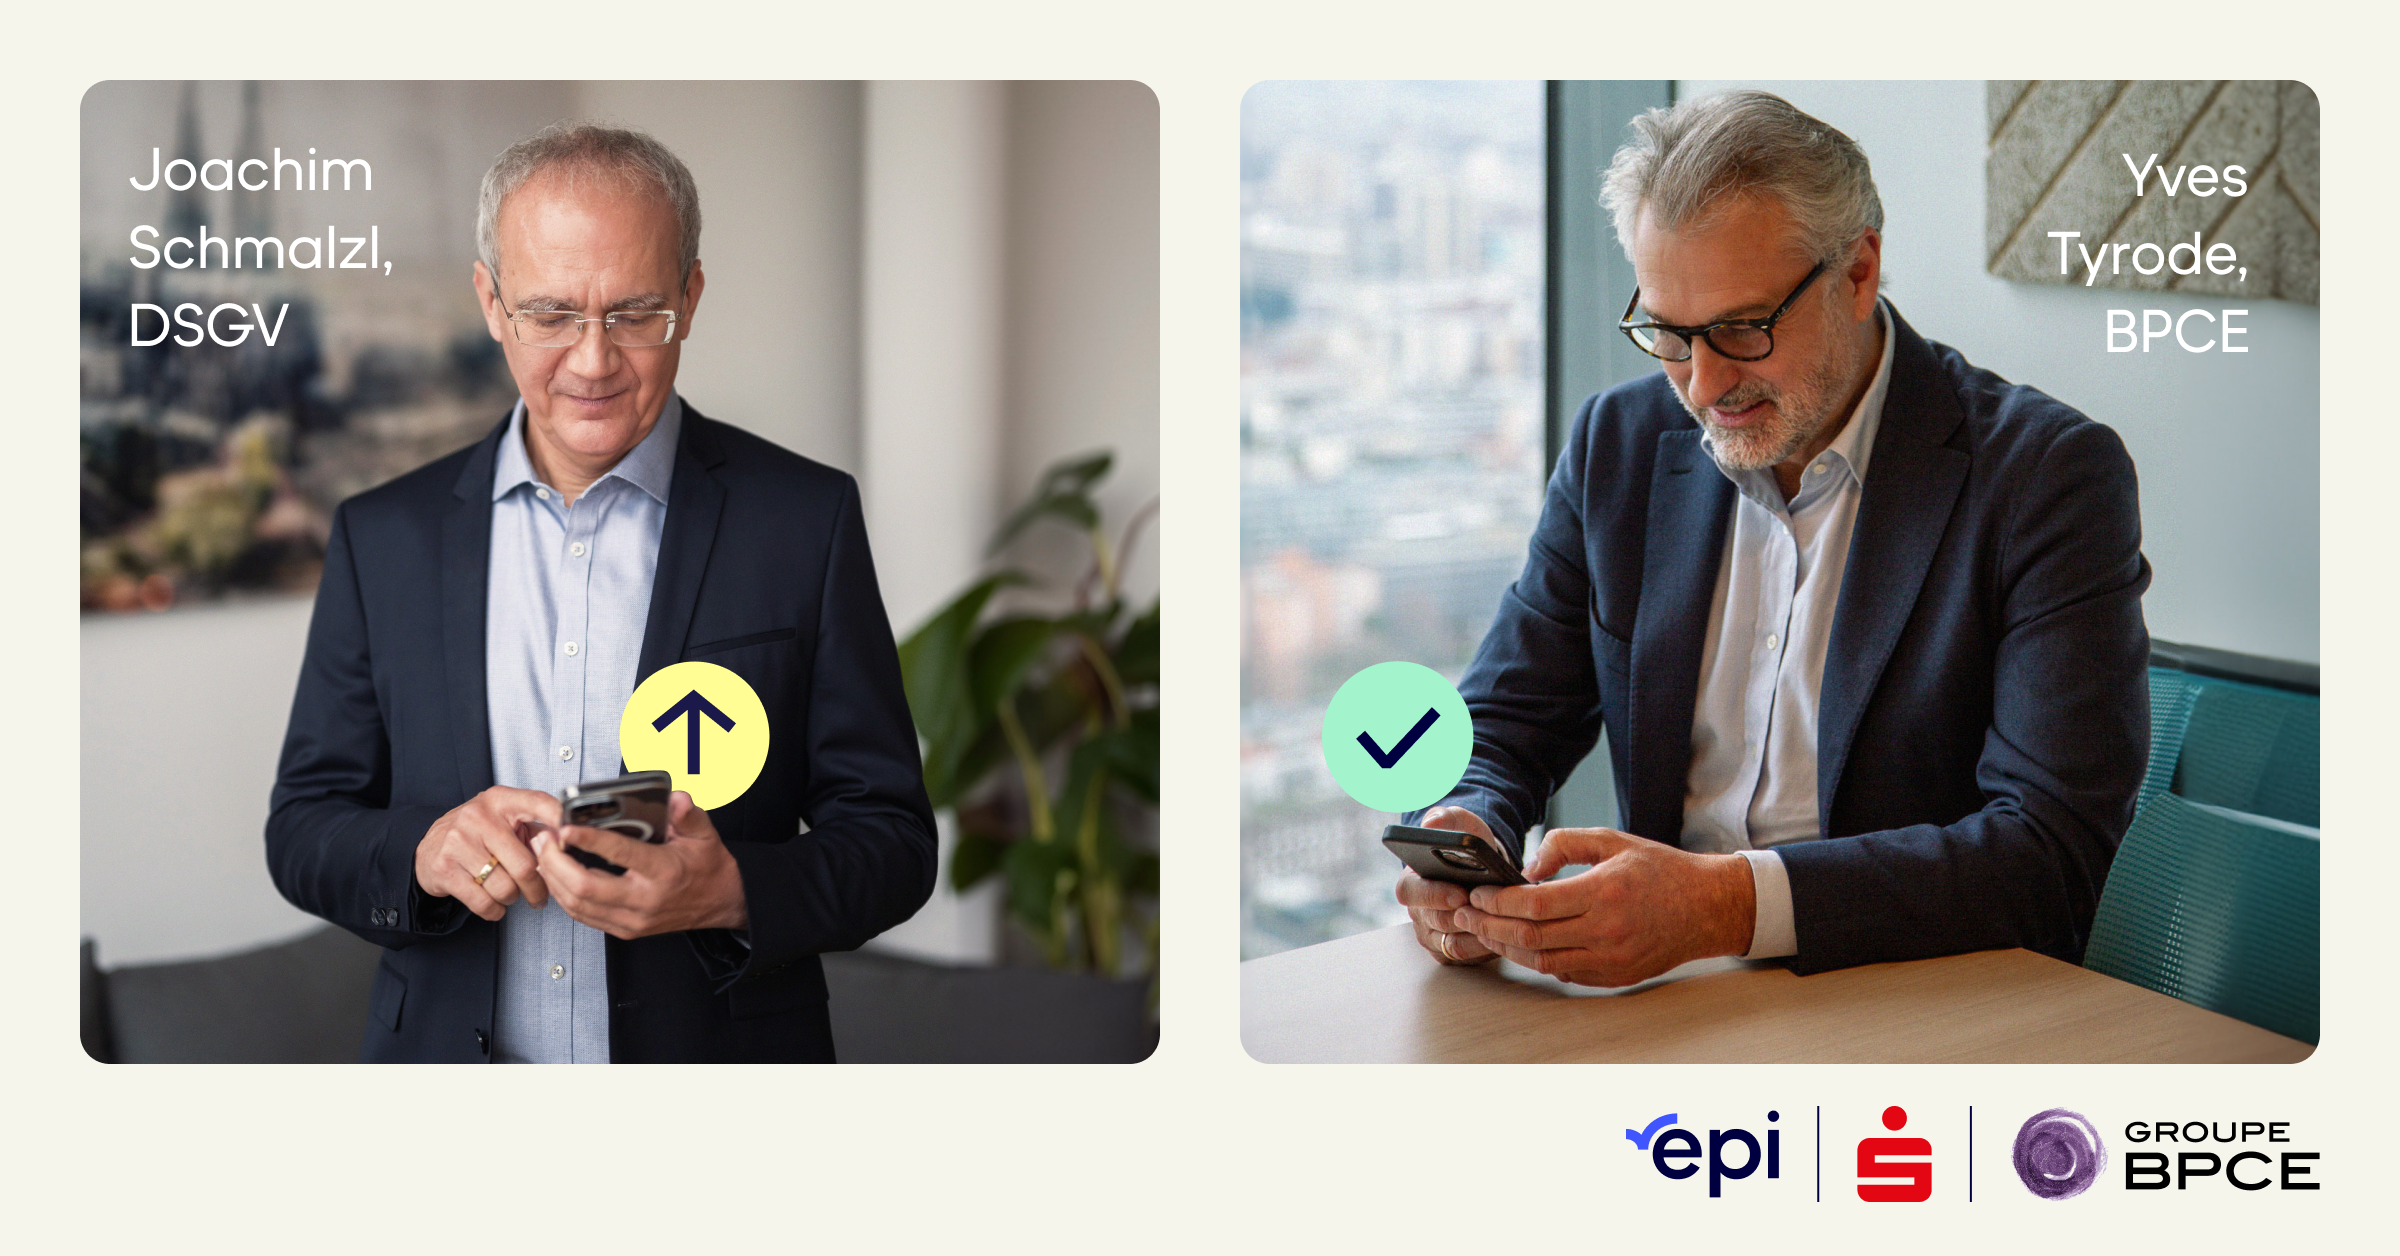 EPI successfully executes first instant payment transactions in Europe with wero between customers from Banque Populaire and Caisse d’Epargne (Groupe BPCE) in France and Sparkasse Elbe-Elster Bank in Germany